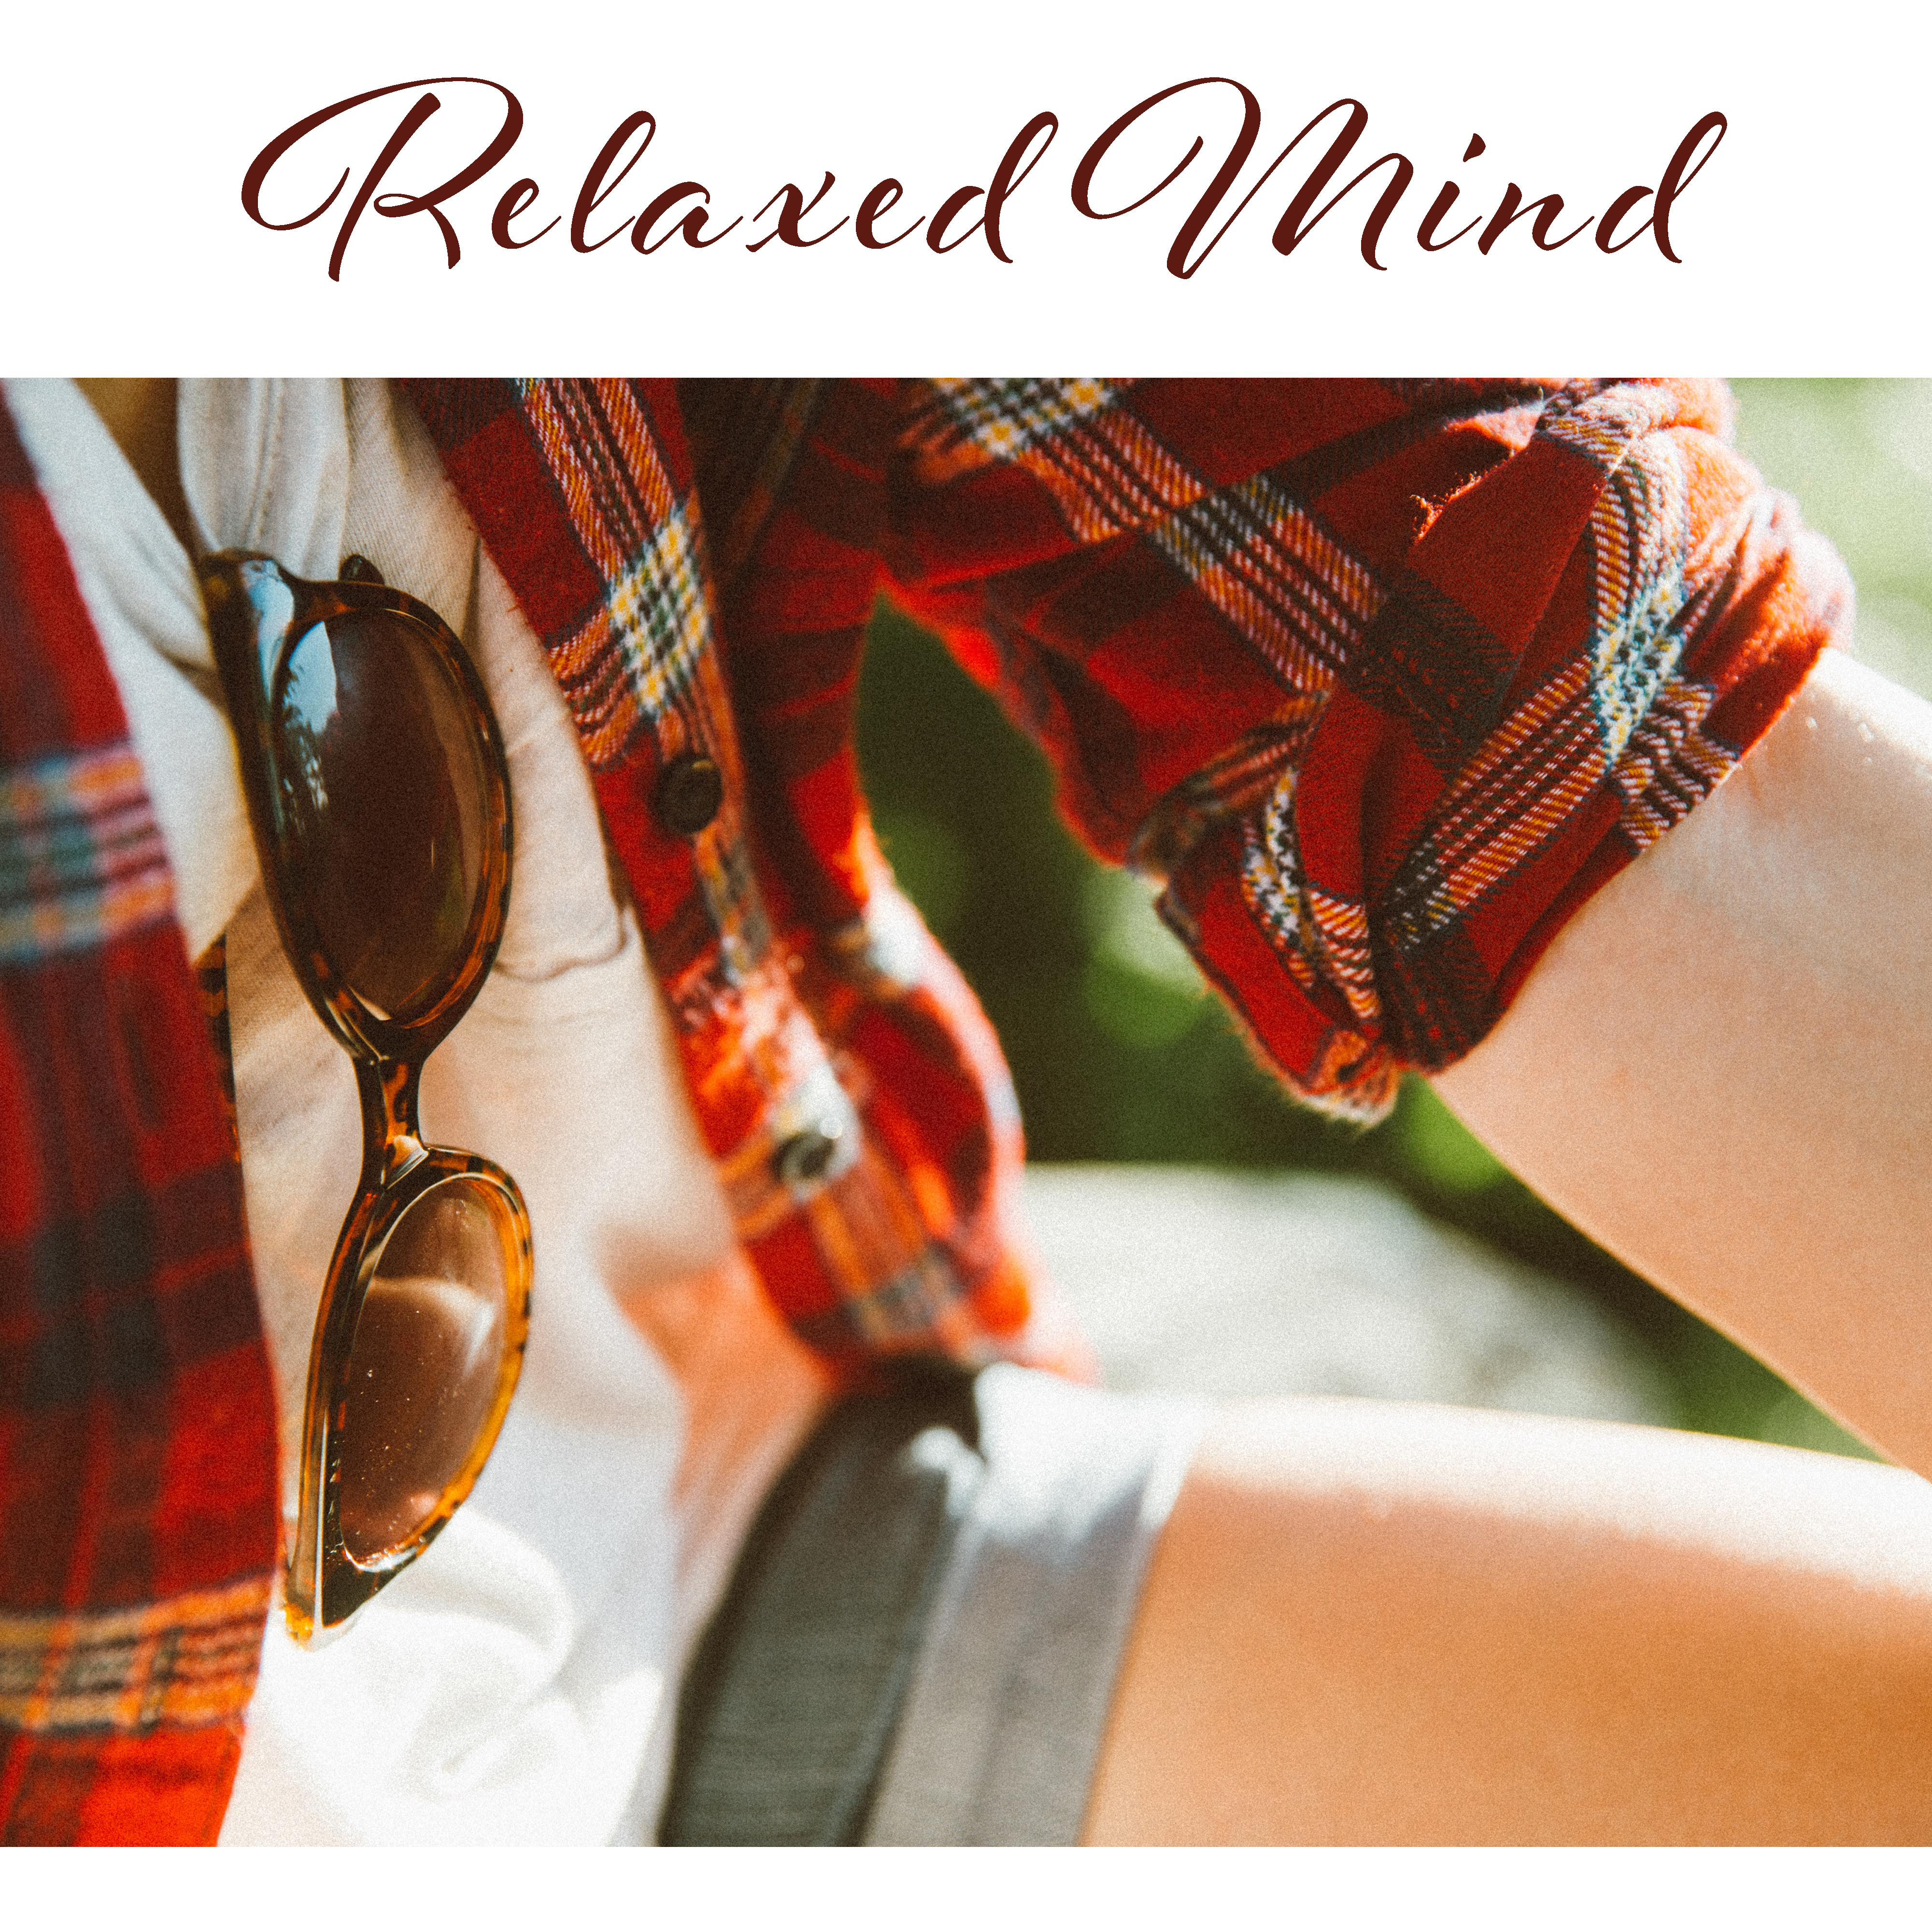 Relaxed Mind – New Age Music to Rest, Soothing Sounds, Soft Melodies Reduce Stress, Ambient Music